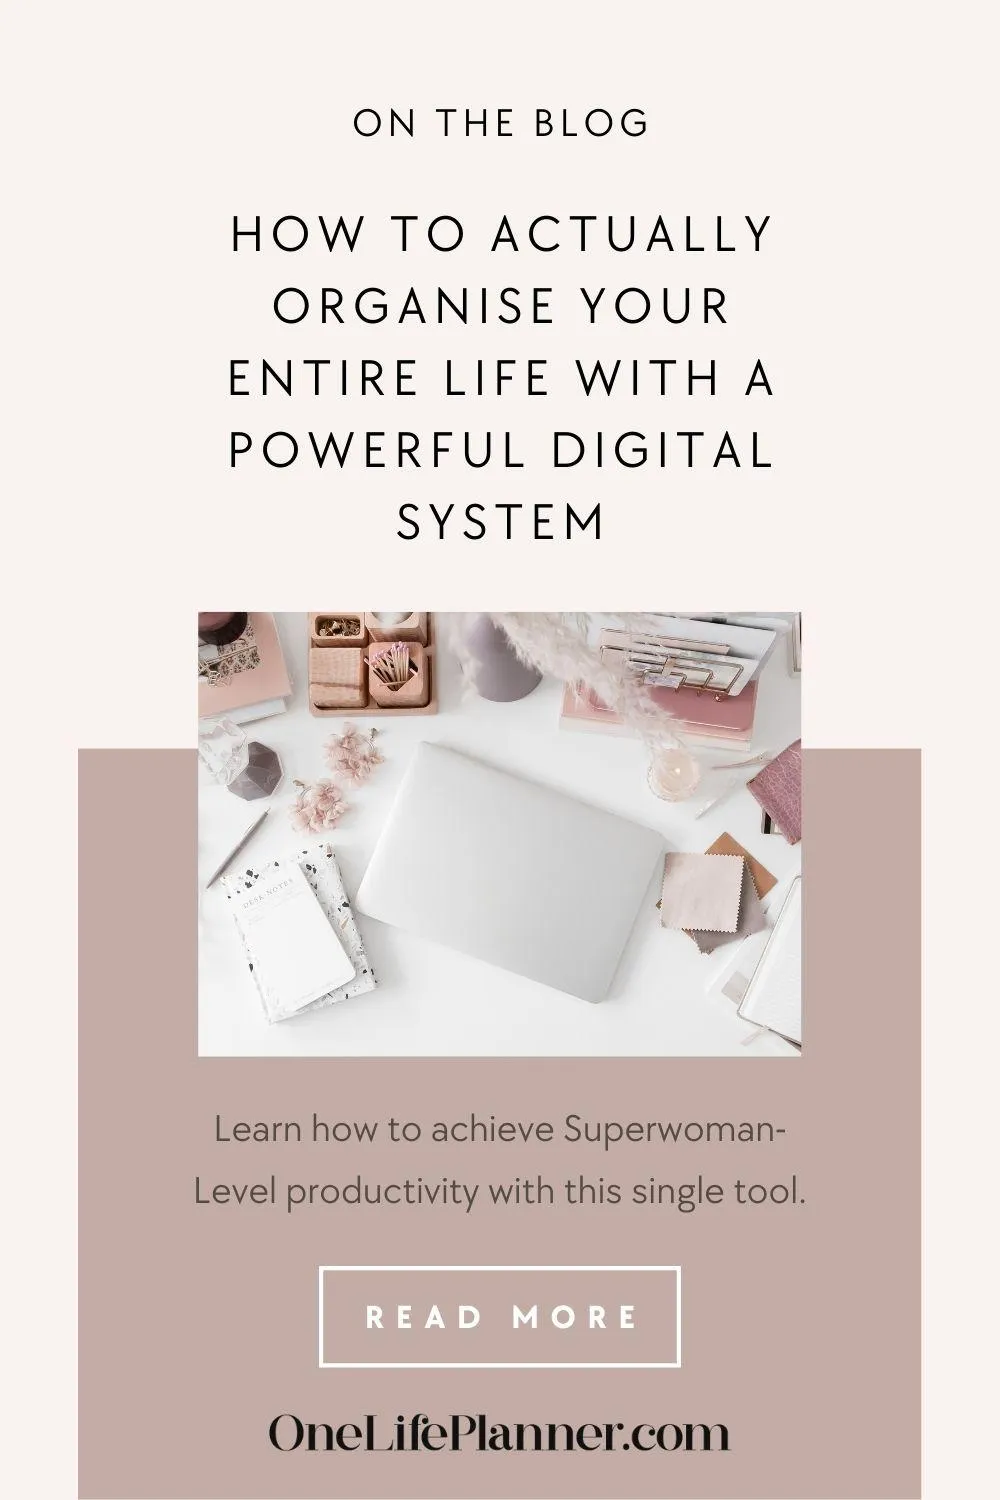 Discover how to manage tasks, track goals, and stay organised effortlessly. And learn how to achieve Superwoman-Level productivity with this online tool. #Notion #productivity #Notiontemplate #organization #timemanagement